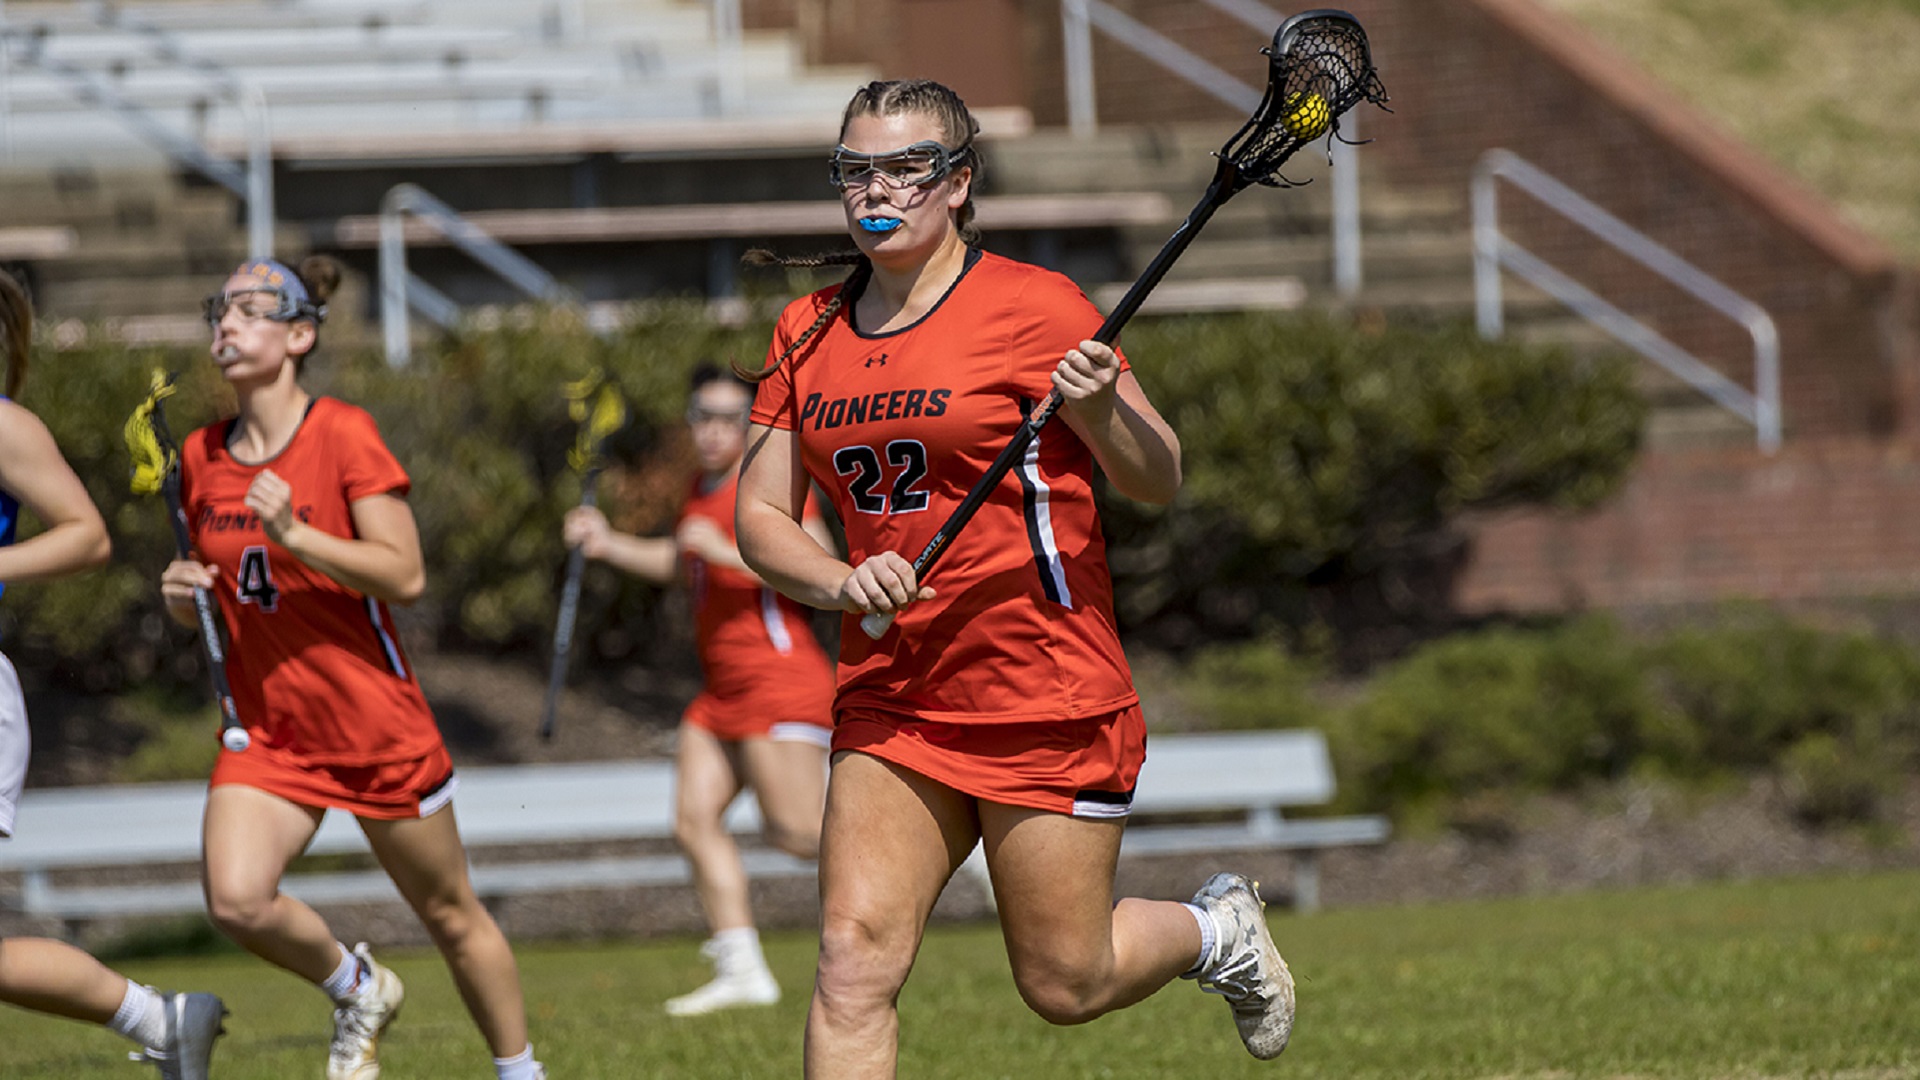 Lucy Brewer had a pair of goals for the Pioneers against Mars Hill (photo by Chuck Williams)